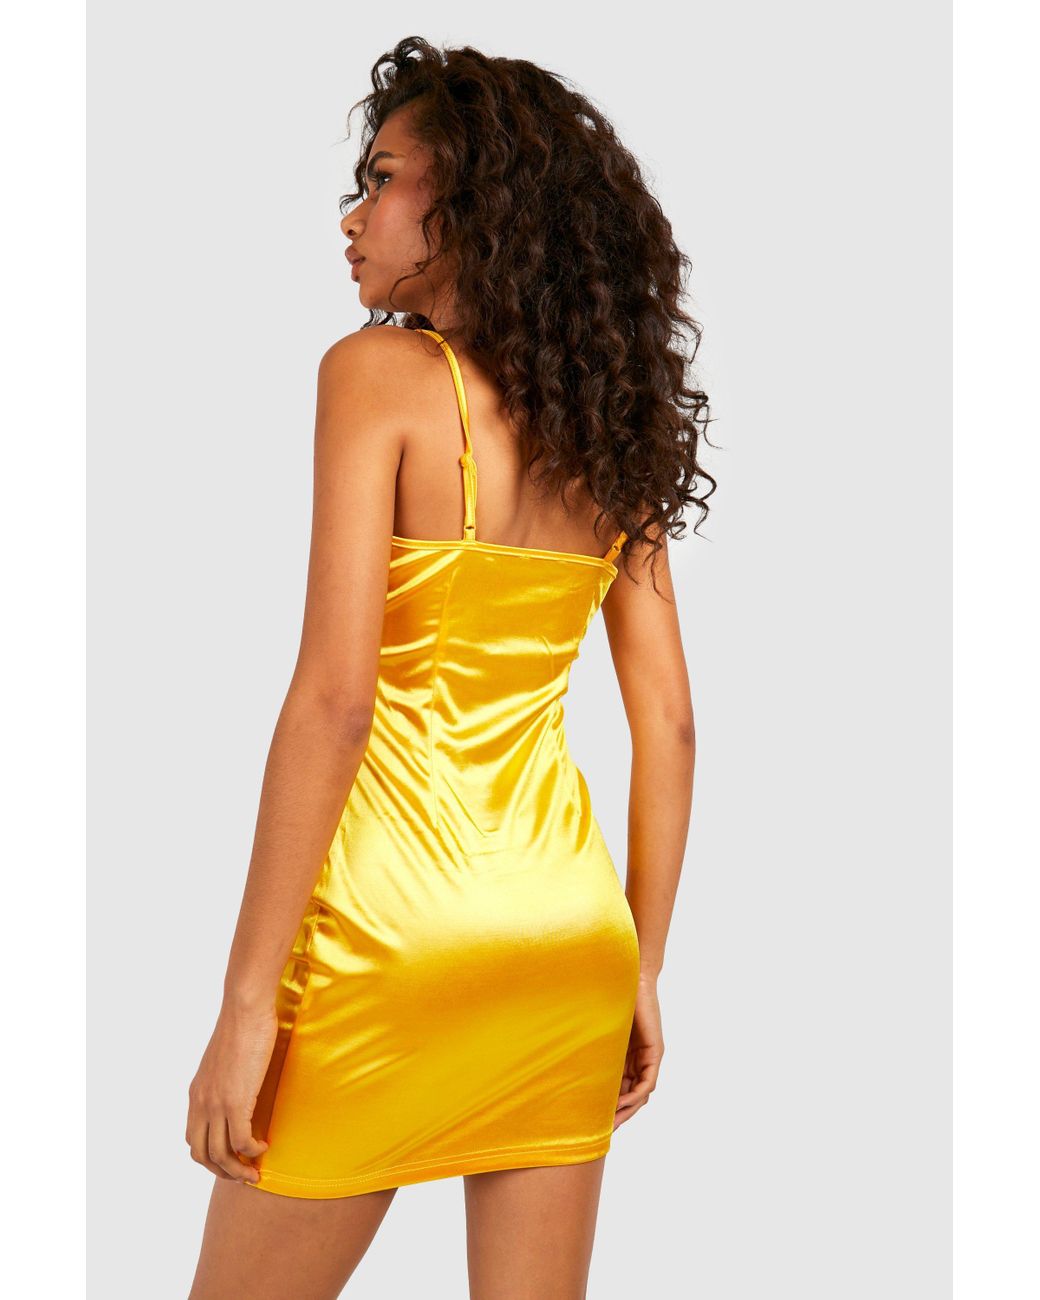 Boohoo Satin Cowl Front Bodycon Dress in Yellow | Lyst